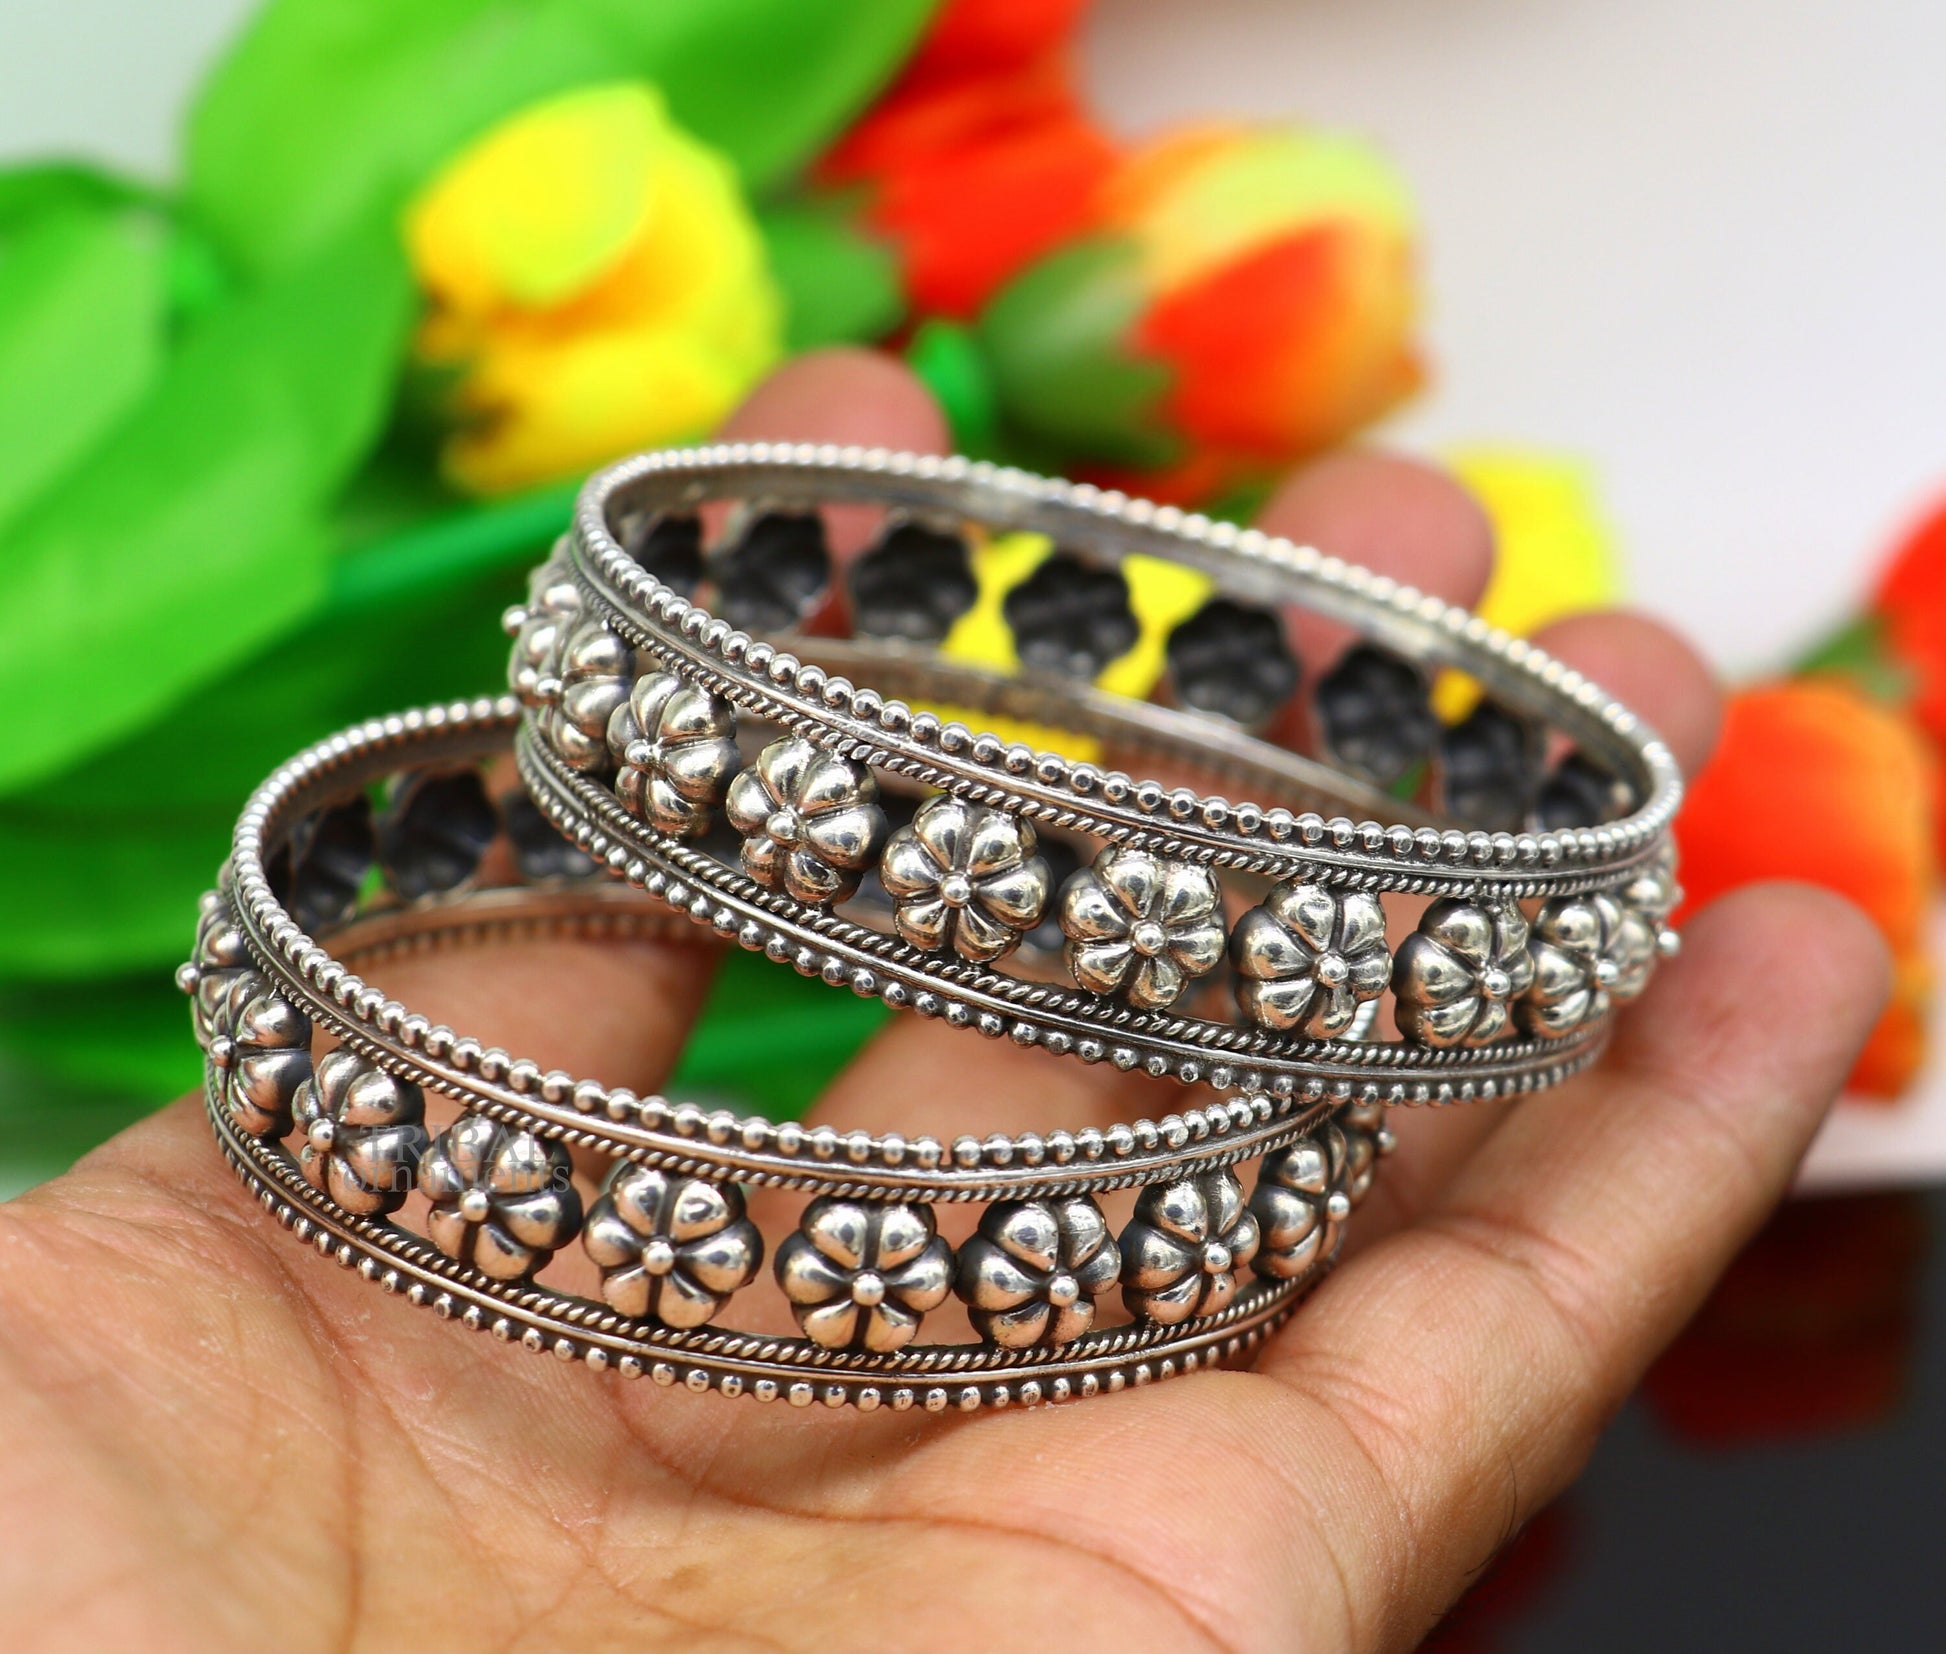 925 sterling silver handmade Gorgeous Vintage floral design bangle bracelet tribal ethnic jewelry best bride gifting jewelry nba312 - TRIBAL ORNAMENTS